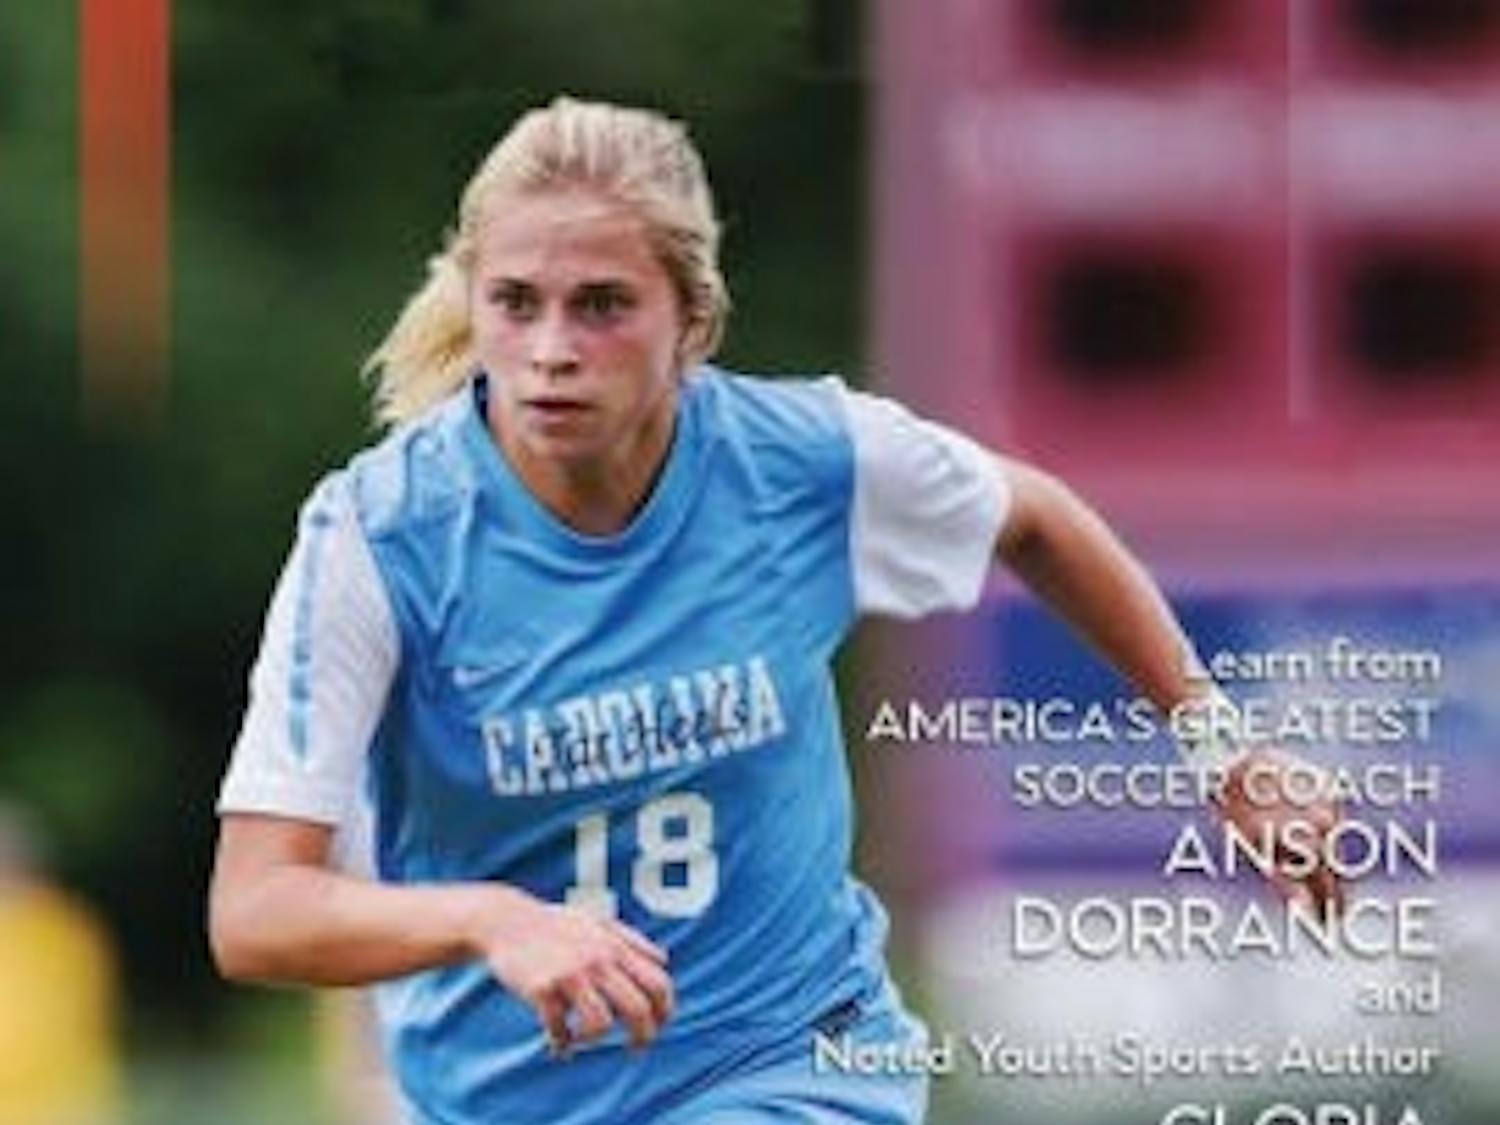 The new edition of the 2002 book "The Vision of a Champion," co-written by Gloria Averbuch and UNC women's soccer head coach Anson Dorrance.